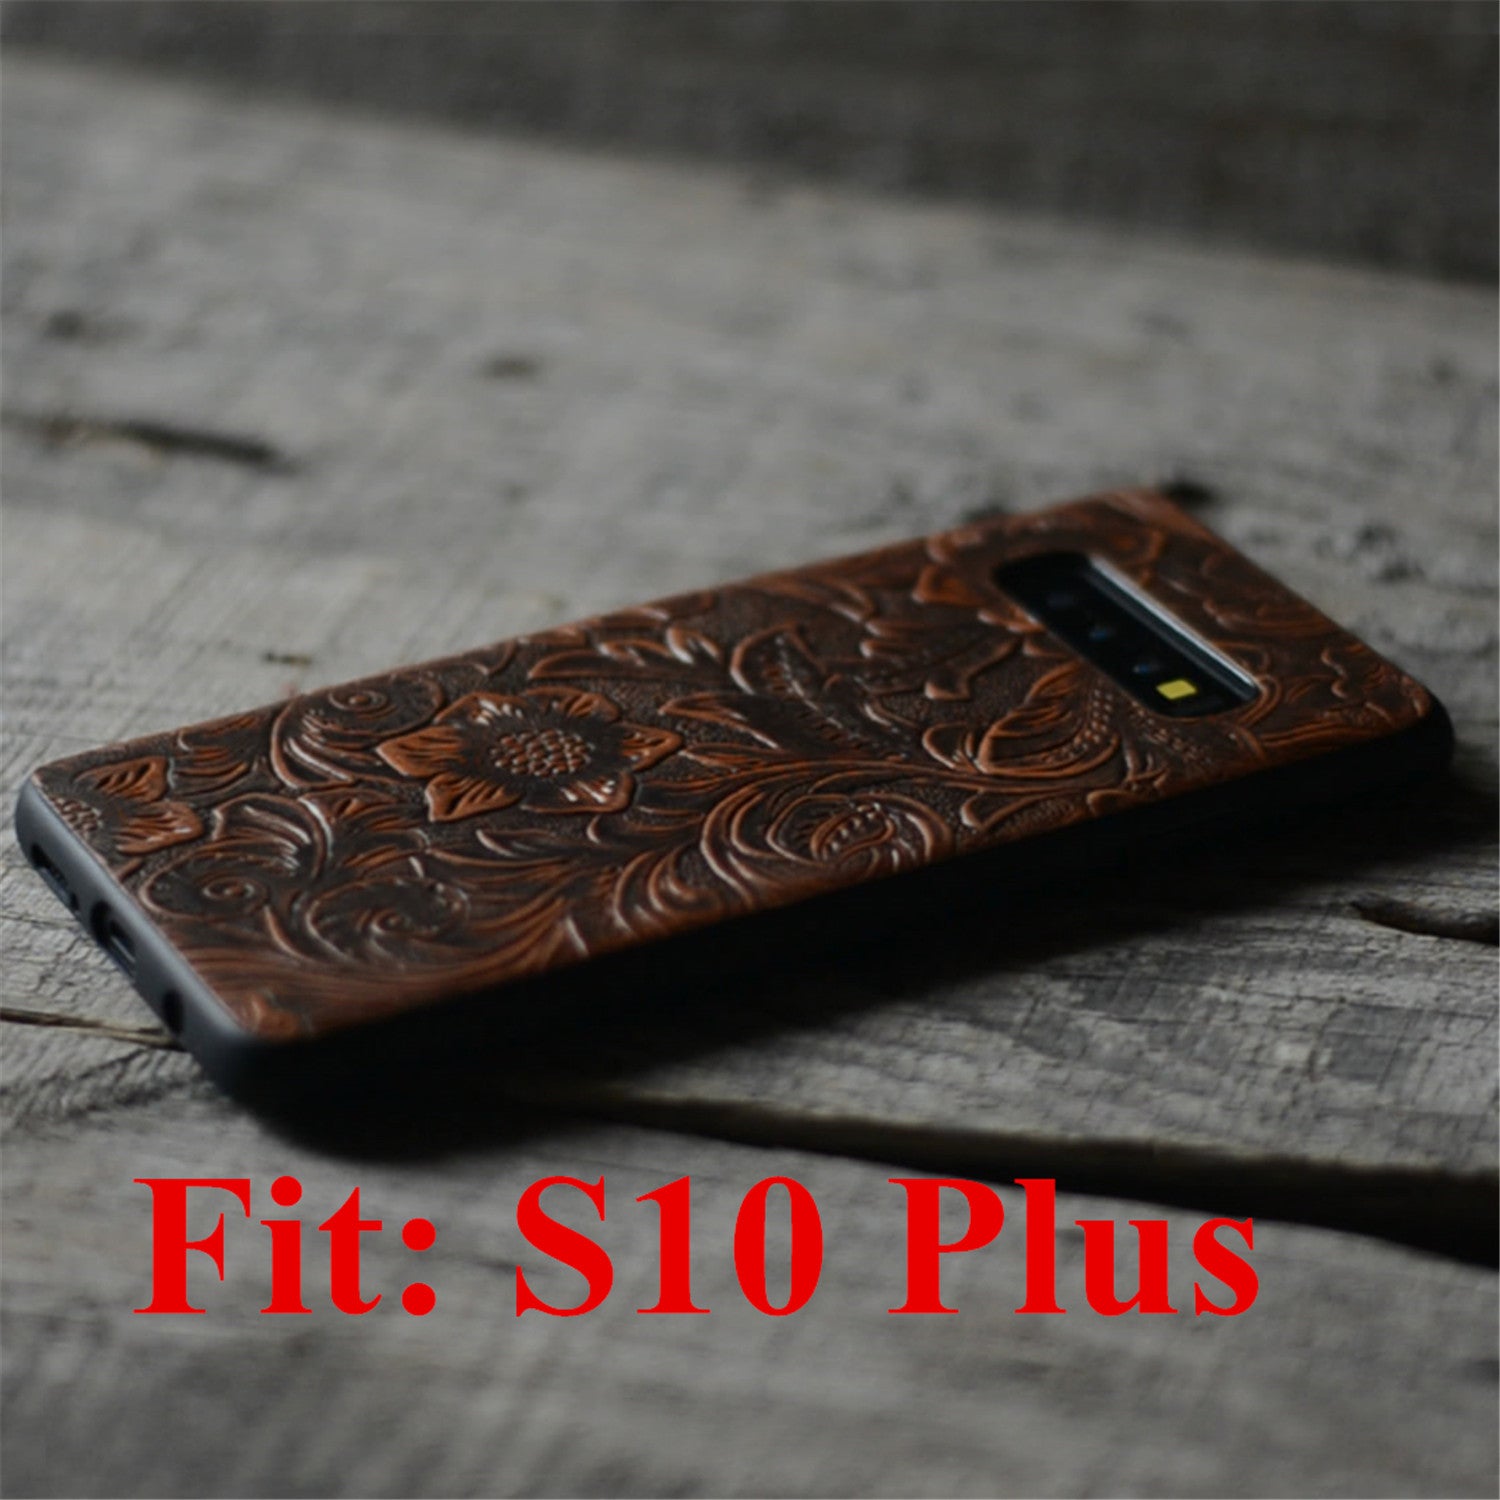 JJNUSA Handmade Leather Case for Samsung Galaxy s10 plus 6.4 inches Back Case